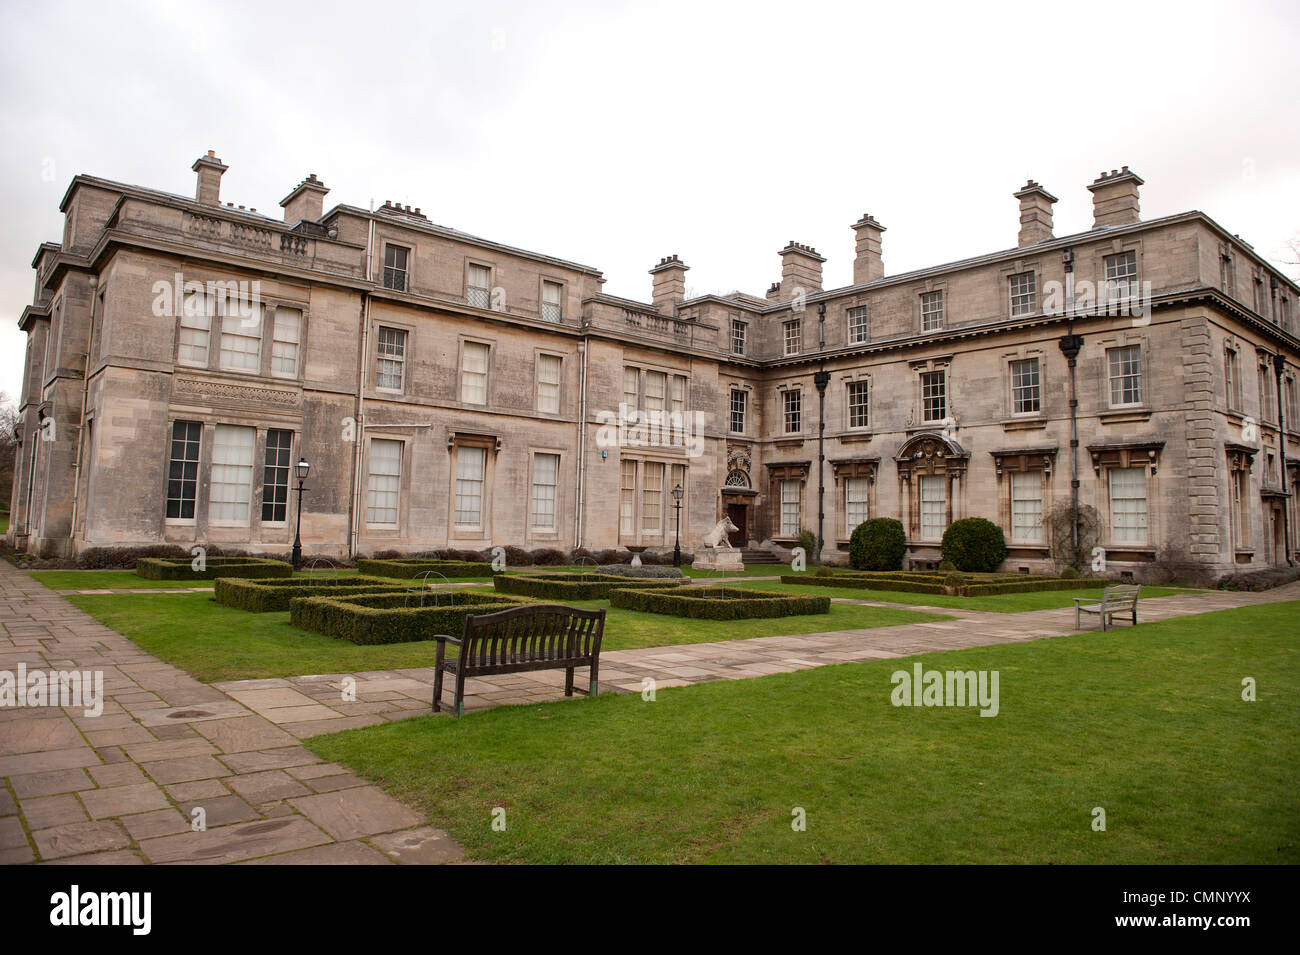 Normanby Hall, near Scunthorpe, Lincolnshire. It is a former stately hall now run as a tourist attraction by the local council. Stock Photo